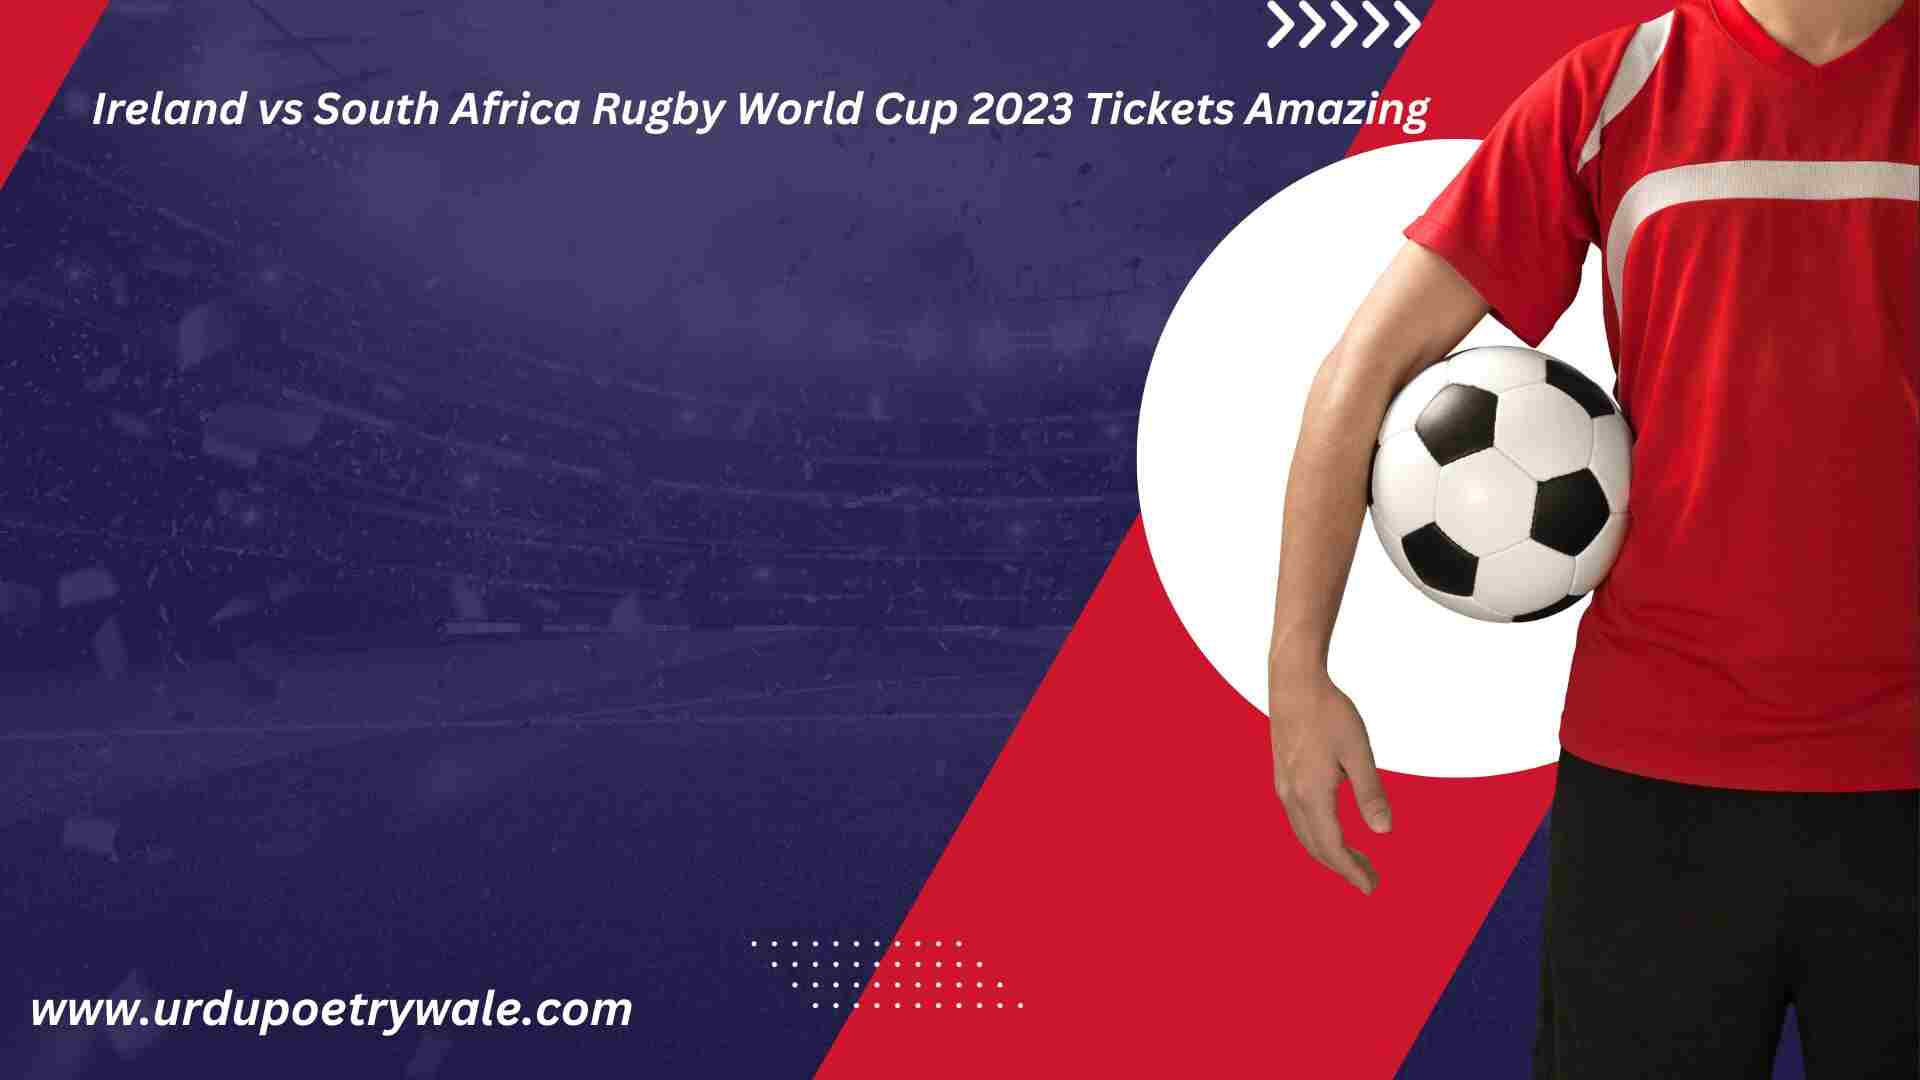 Ireland Vs South Africa Rugby World Cup 2023 Tickets Amazing